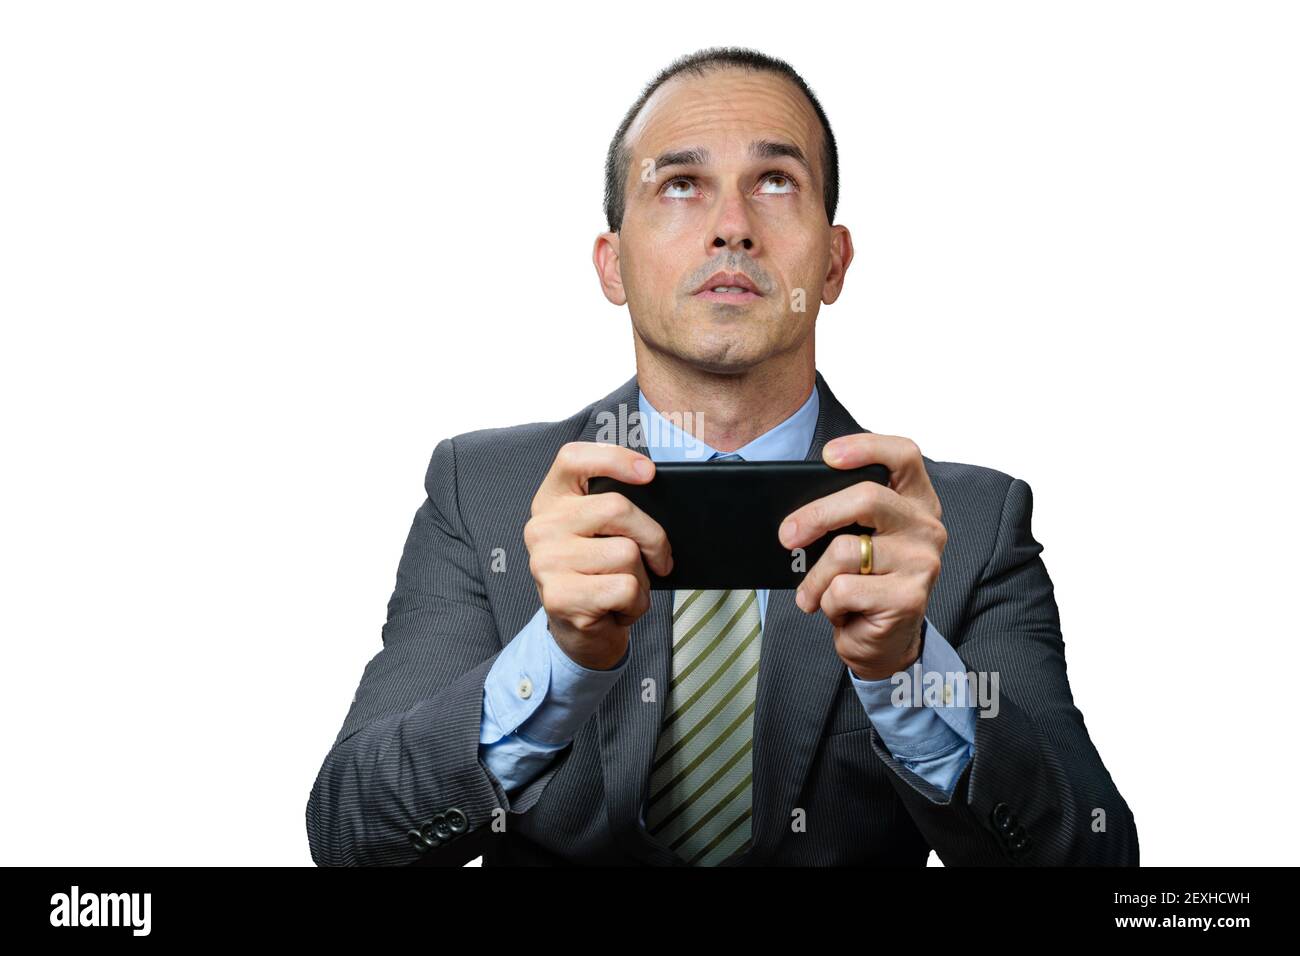 Mature man with suit and tie, holding his smartphone horizontally, worried and looking up. Stock Photo